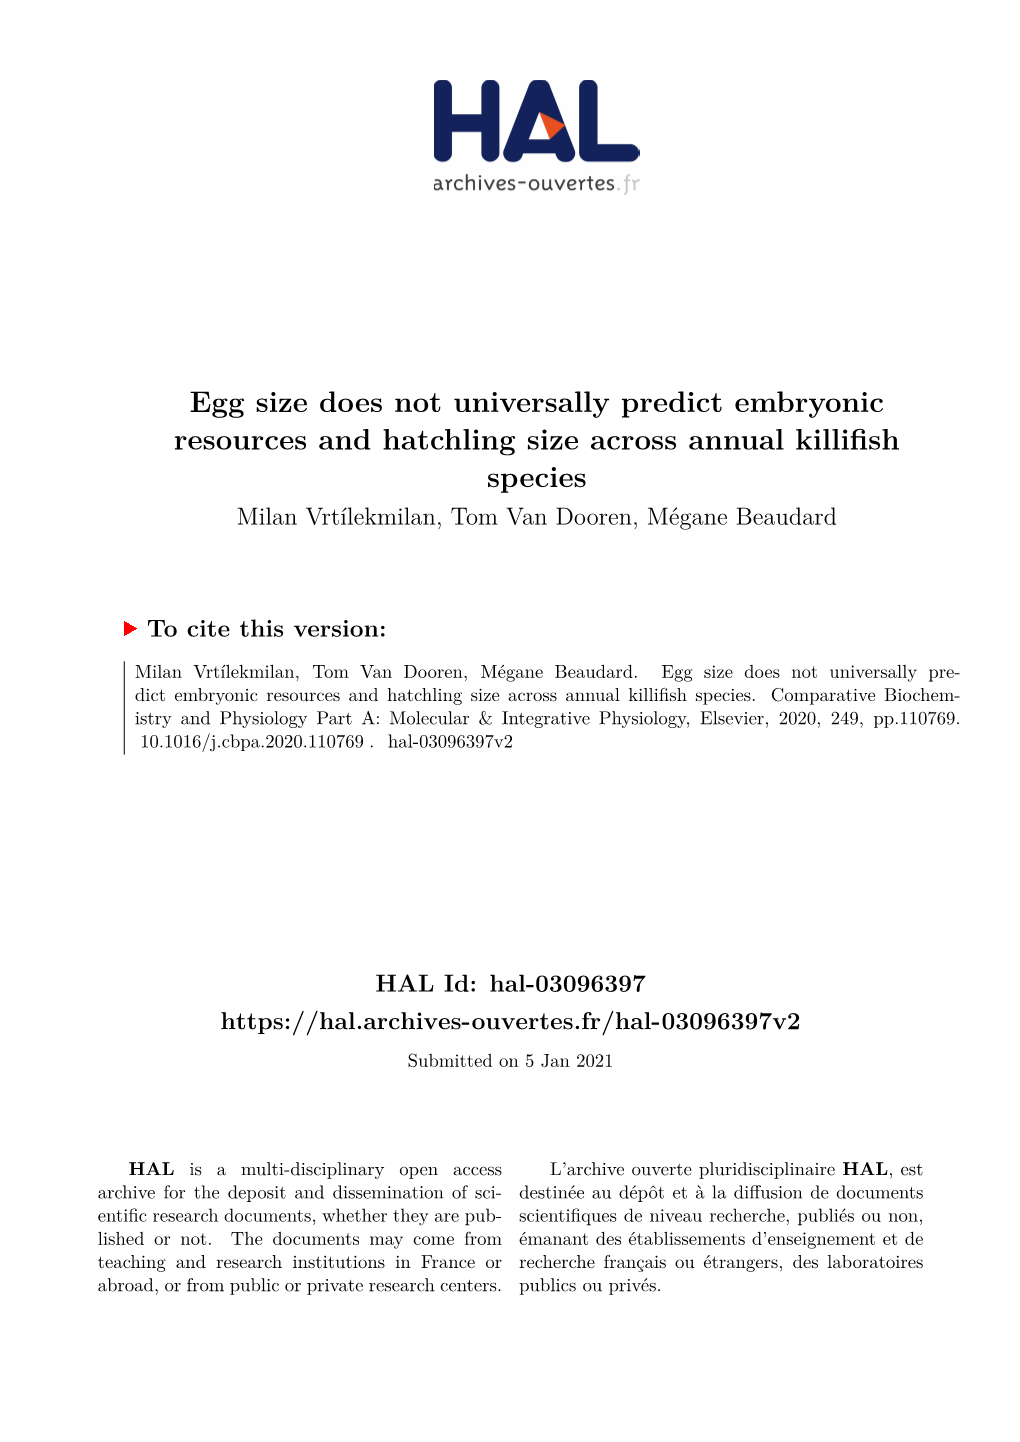 Egg Size Does Not Universally Predict Embryonic Resources and Hatchling Size Across Annual Killifish Species Milan Vrtílekmilan, Tom Van Dooren, Mégane Beaudard